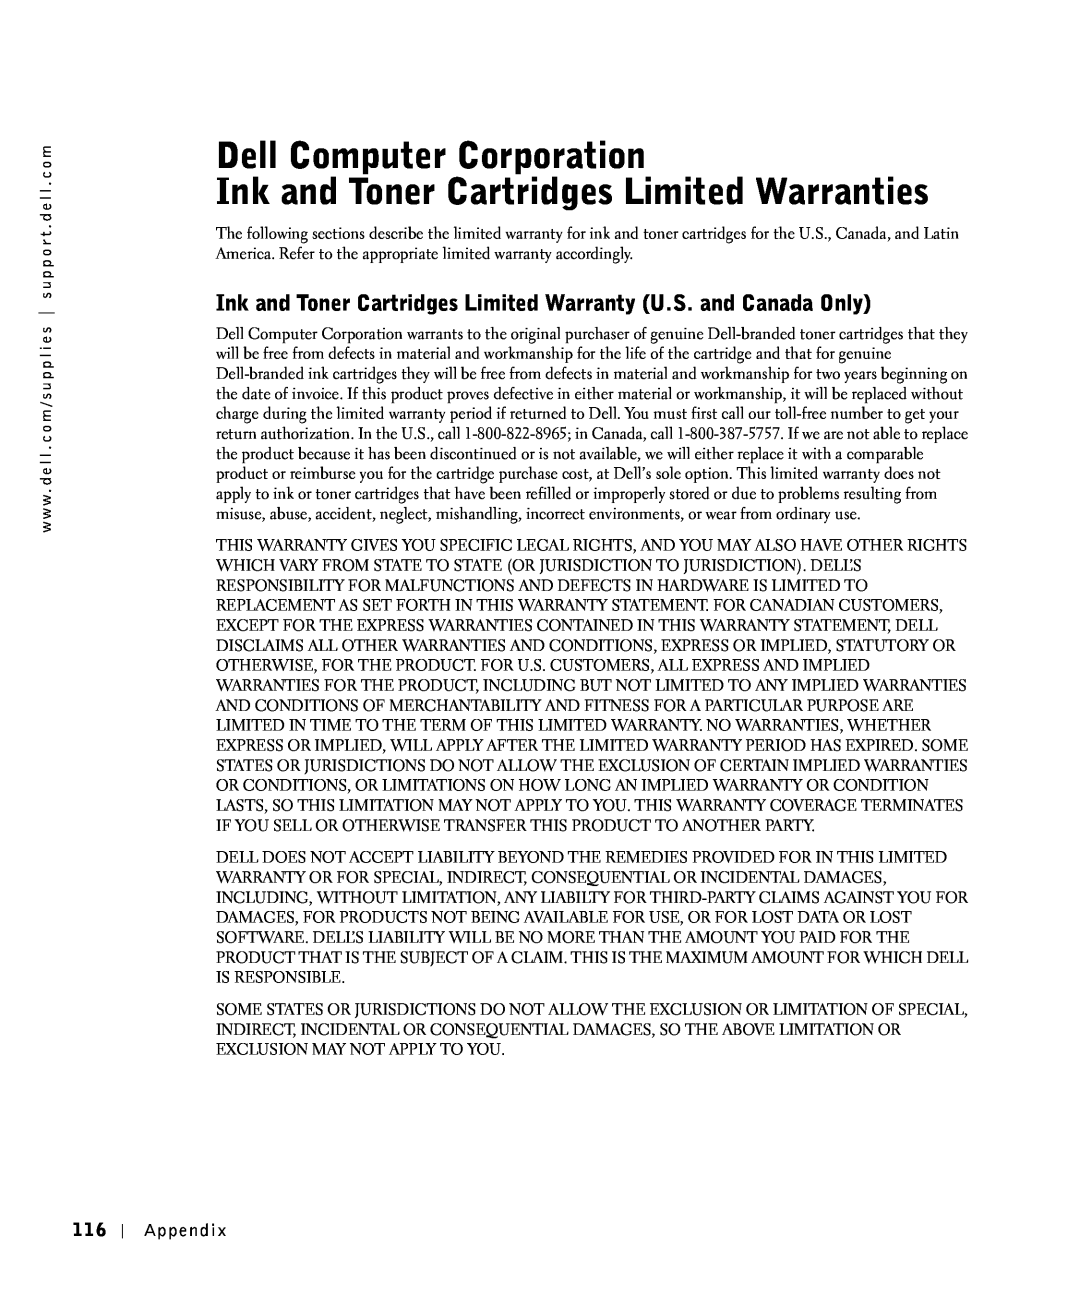 Dell S2500 owner manual Dell Computer Corporation Ink and Toner Cartridges Limited Warranties, Appendix 